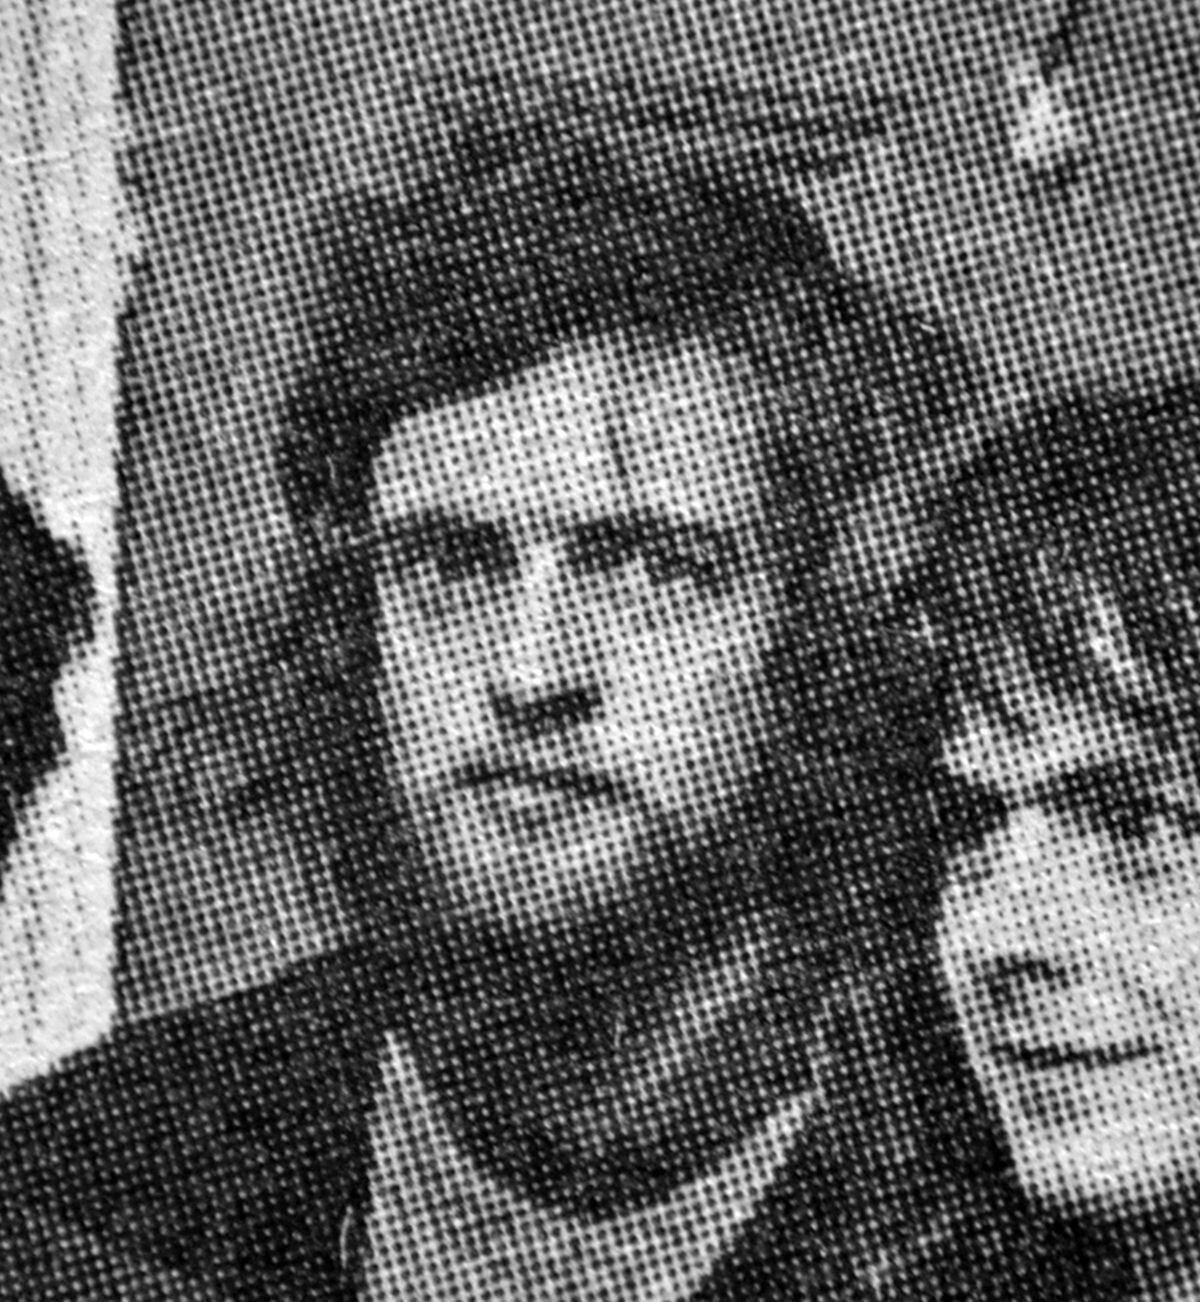 Back in 1971 Jezza was a stereotypical bearded leftie